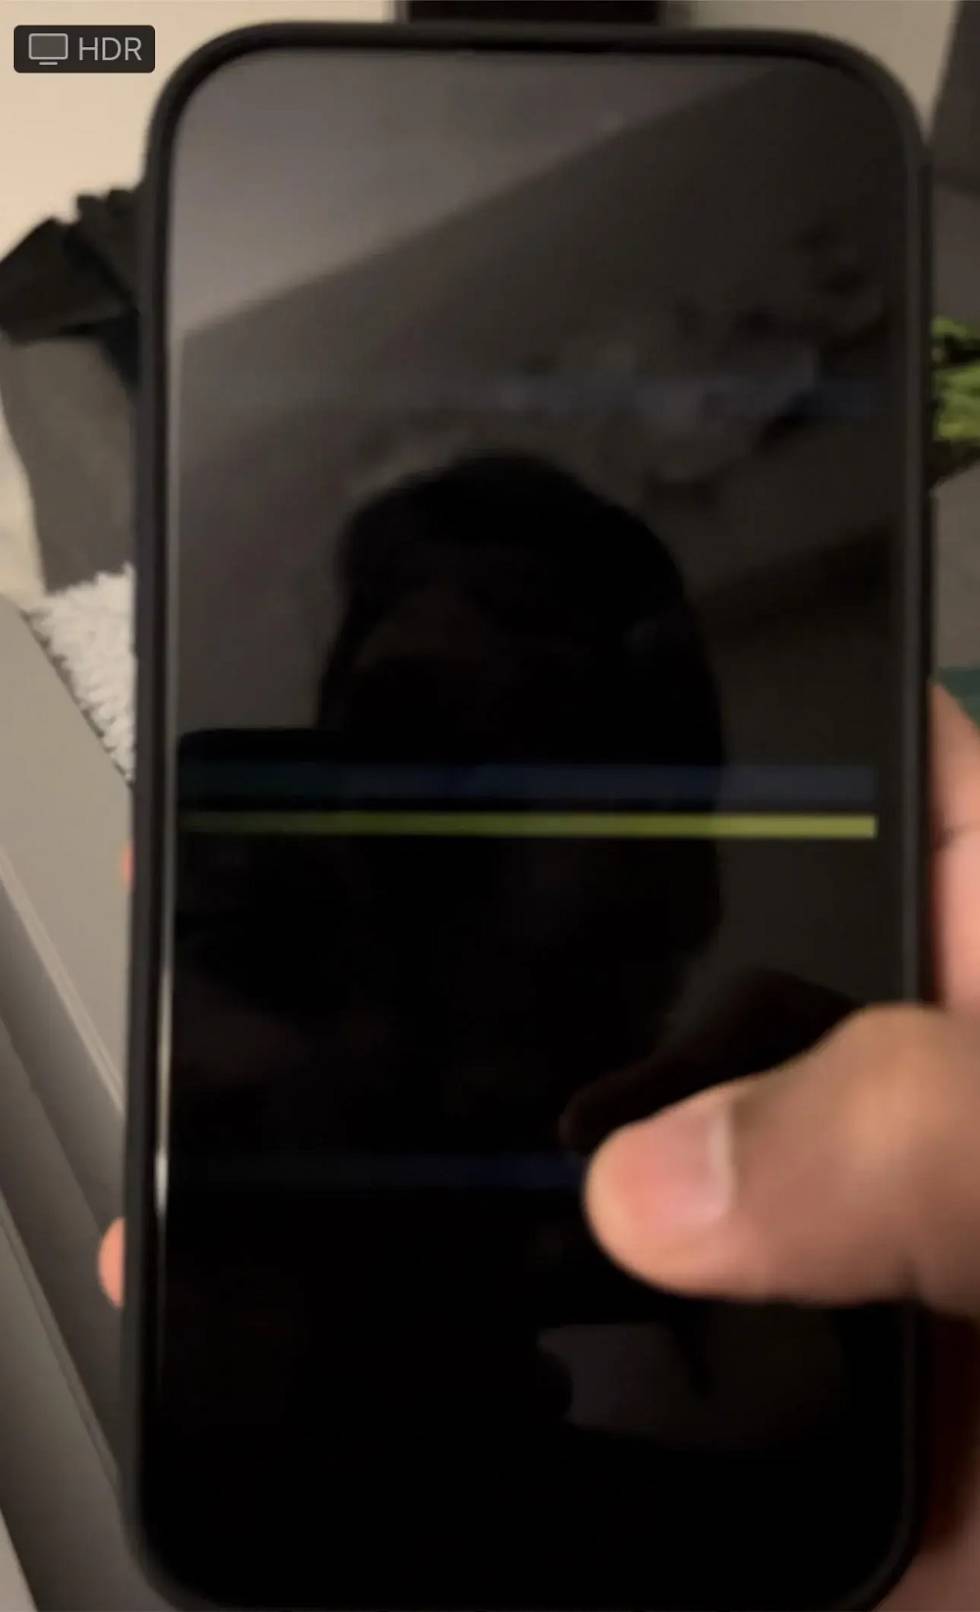 iPhone 14 Pro users report flashes of horizontal lines when turning on